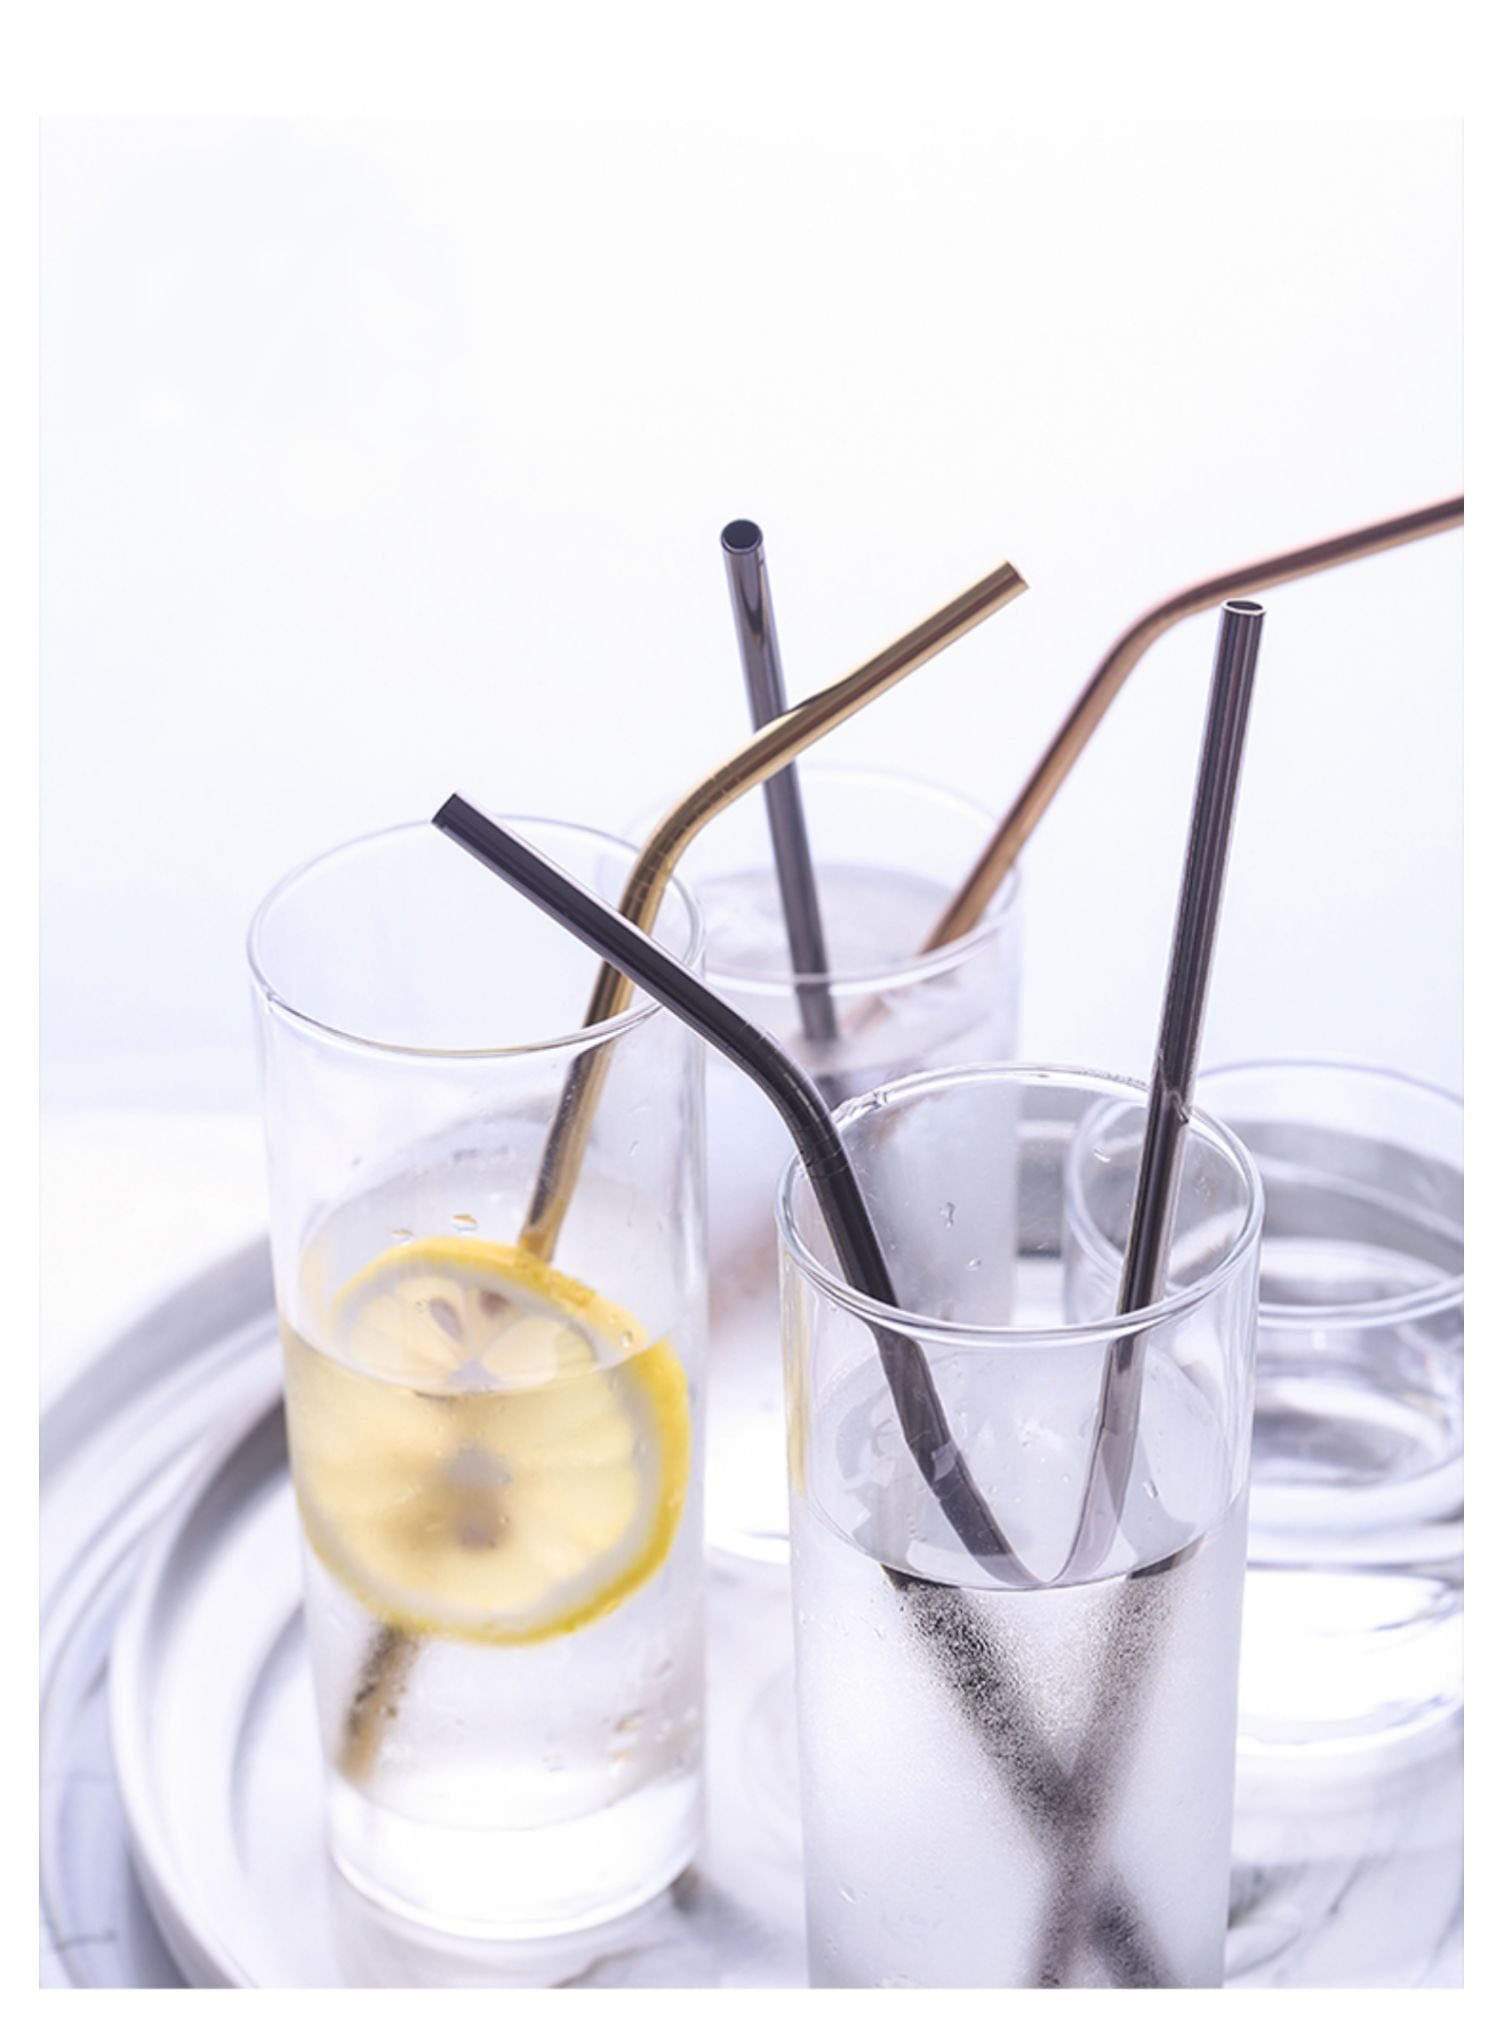 Helms Store Homewares Stainless Steel Reusable Straw (Gold, Rose Gold and Black)